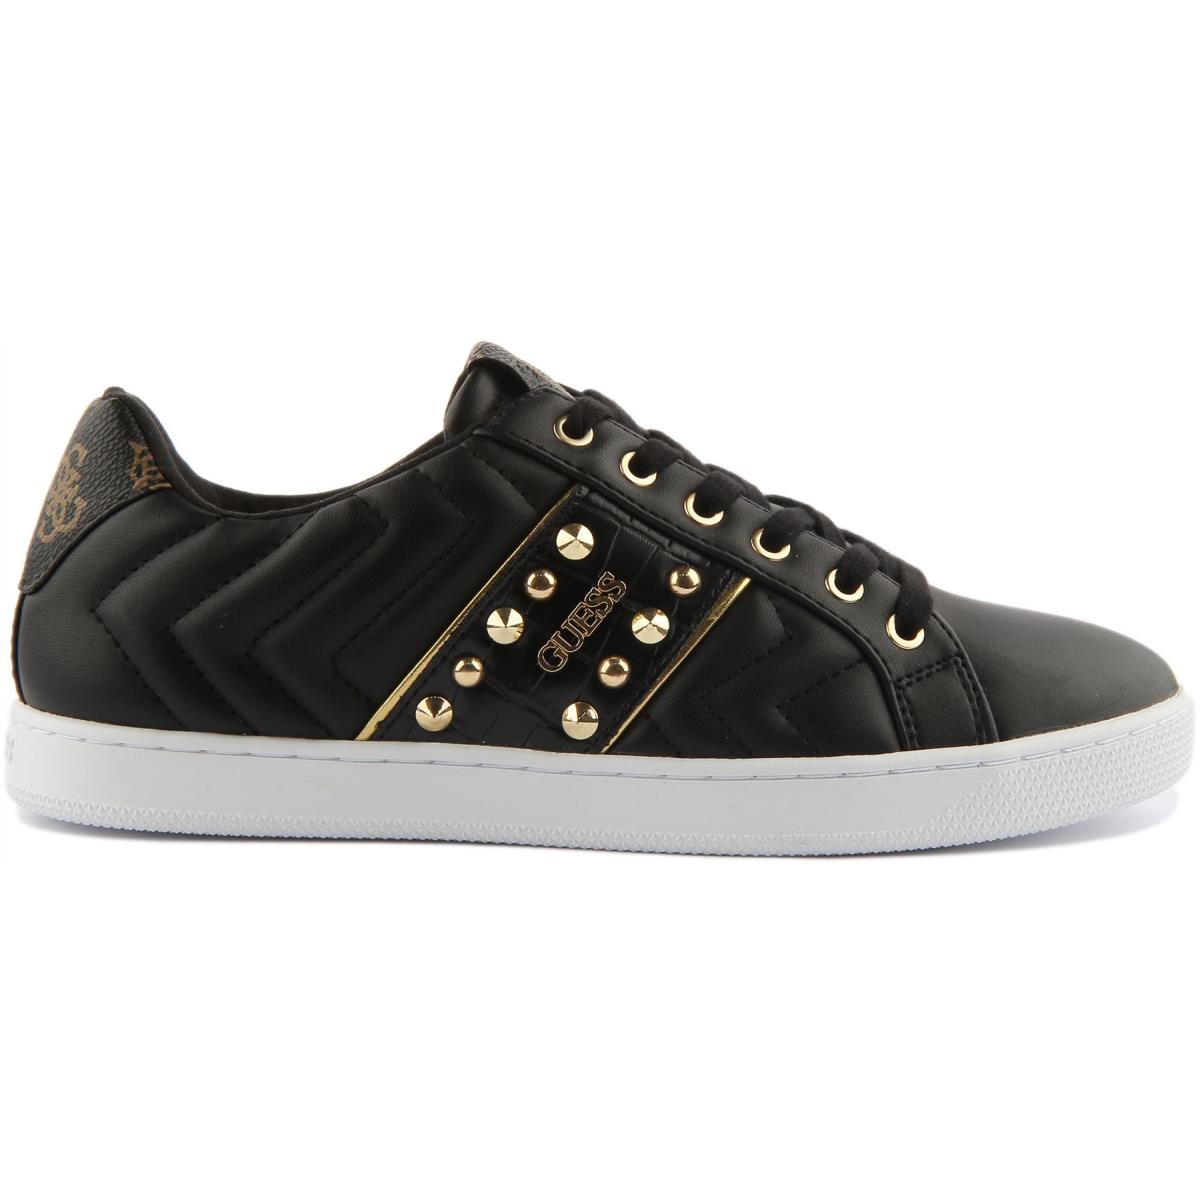 Guess Fl7Raufal12 Raula Womens Lace Up Casual Low Sneakers Size US 5 - 11